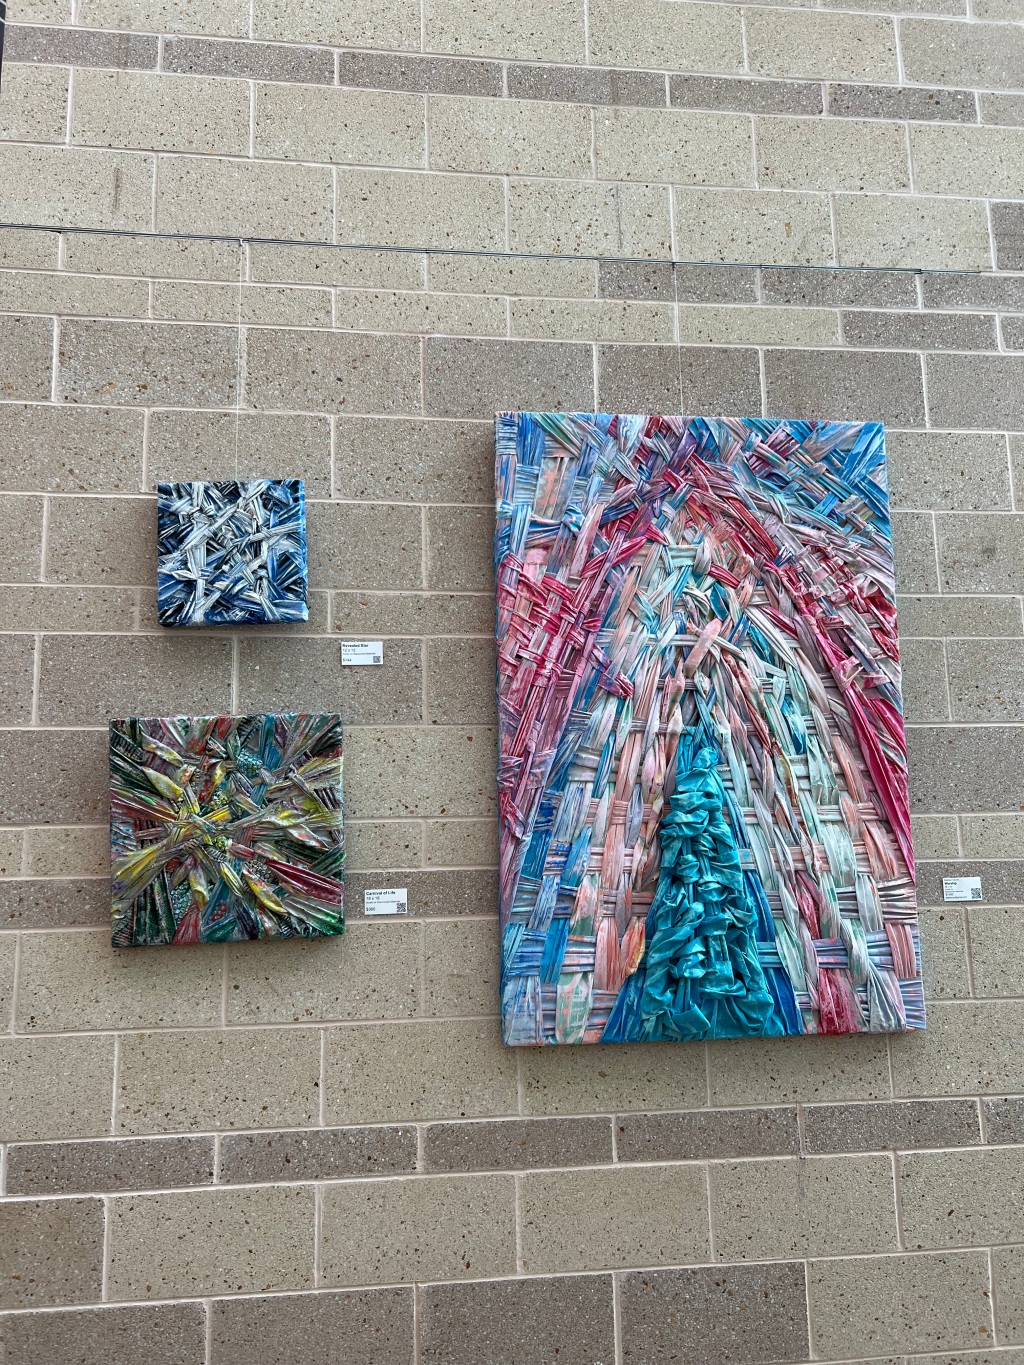 The Woven Works of Debbie Secan!